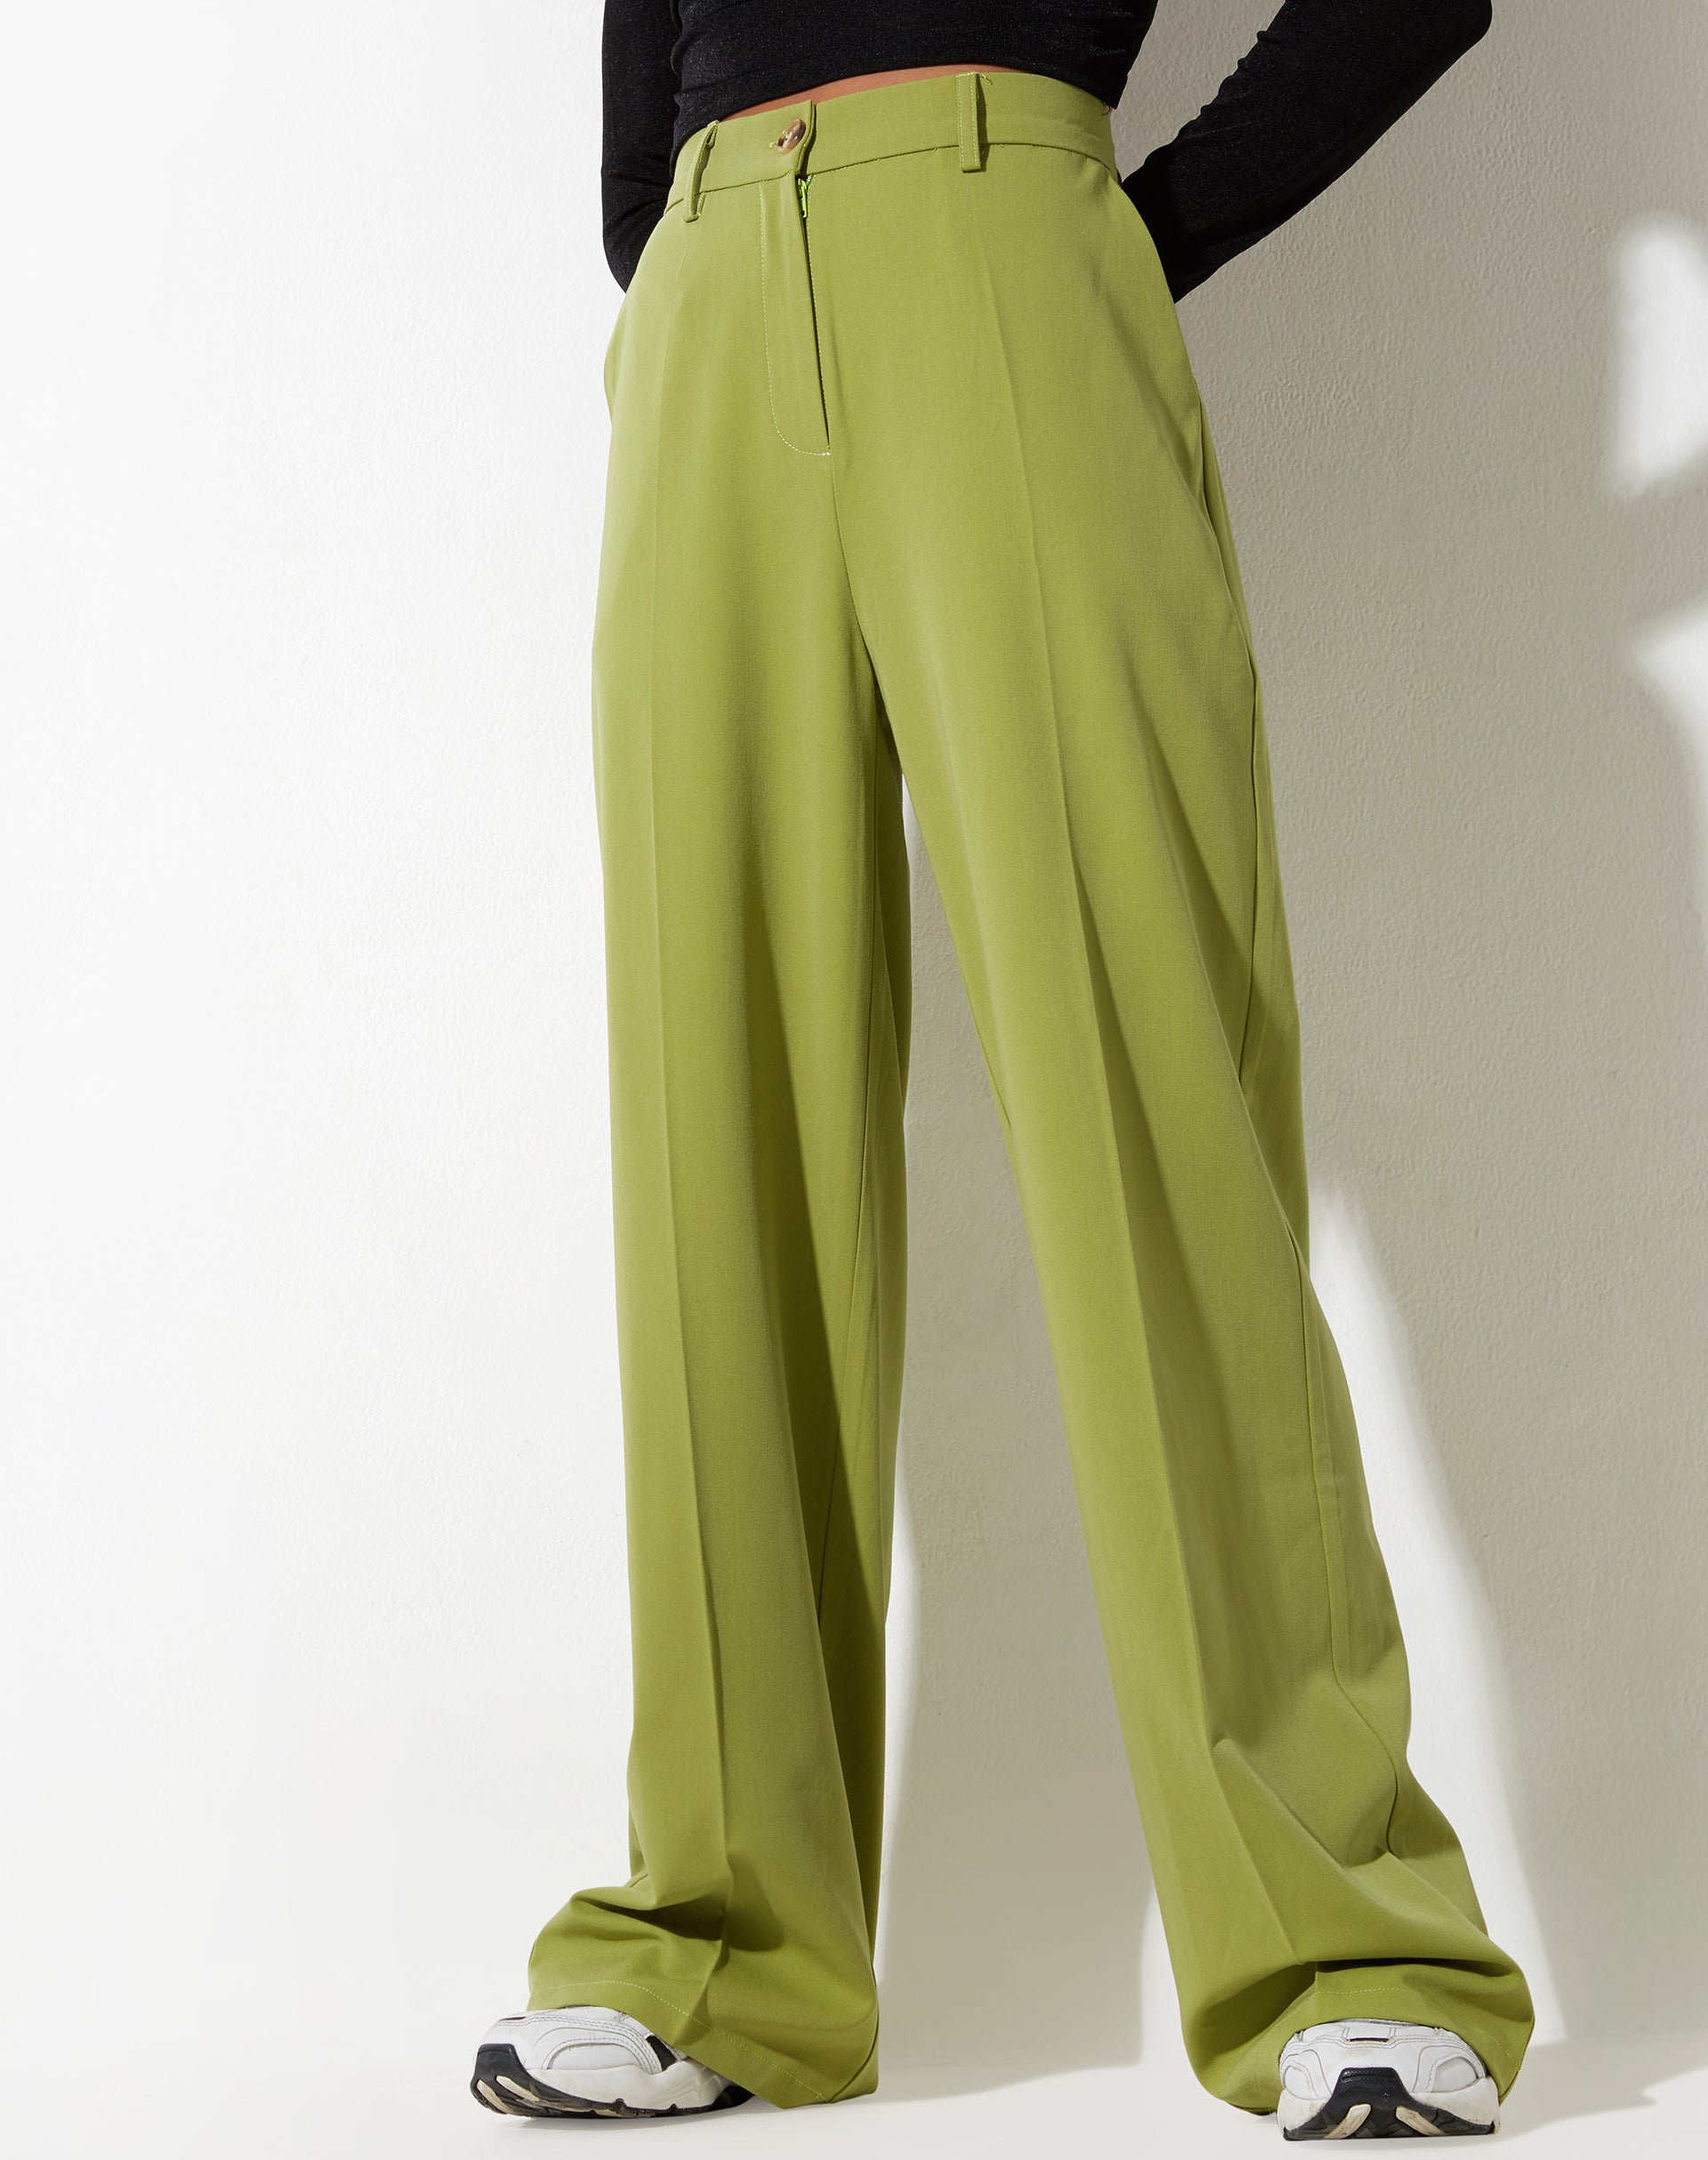 image of Abba Straight Leg Trouser in Tailoring Apple Green